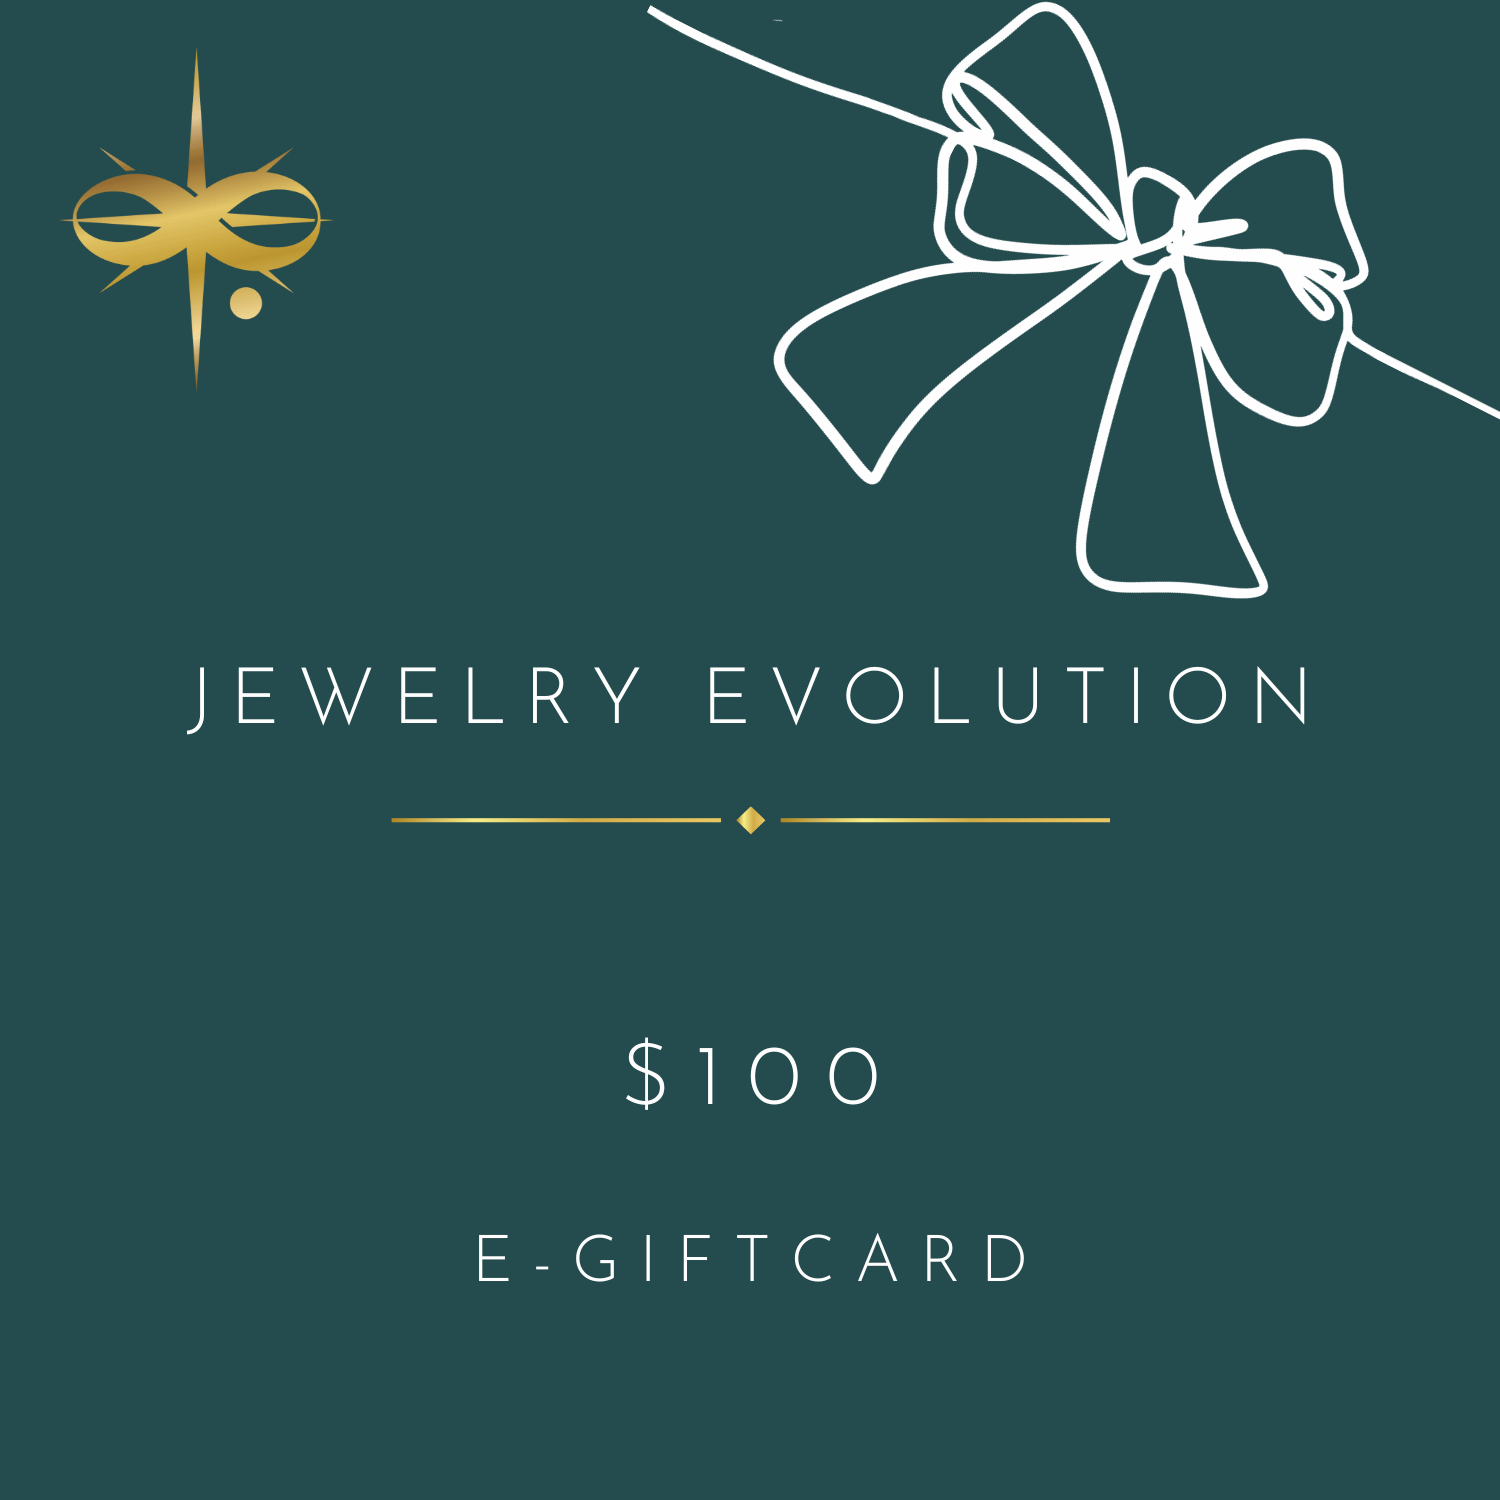 Jewelry Evolution Gift Card $100.00 Gift Card